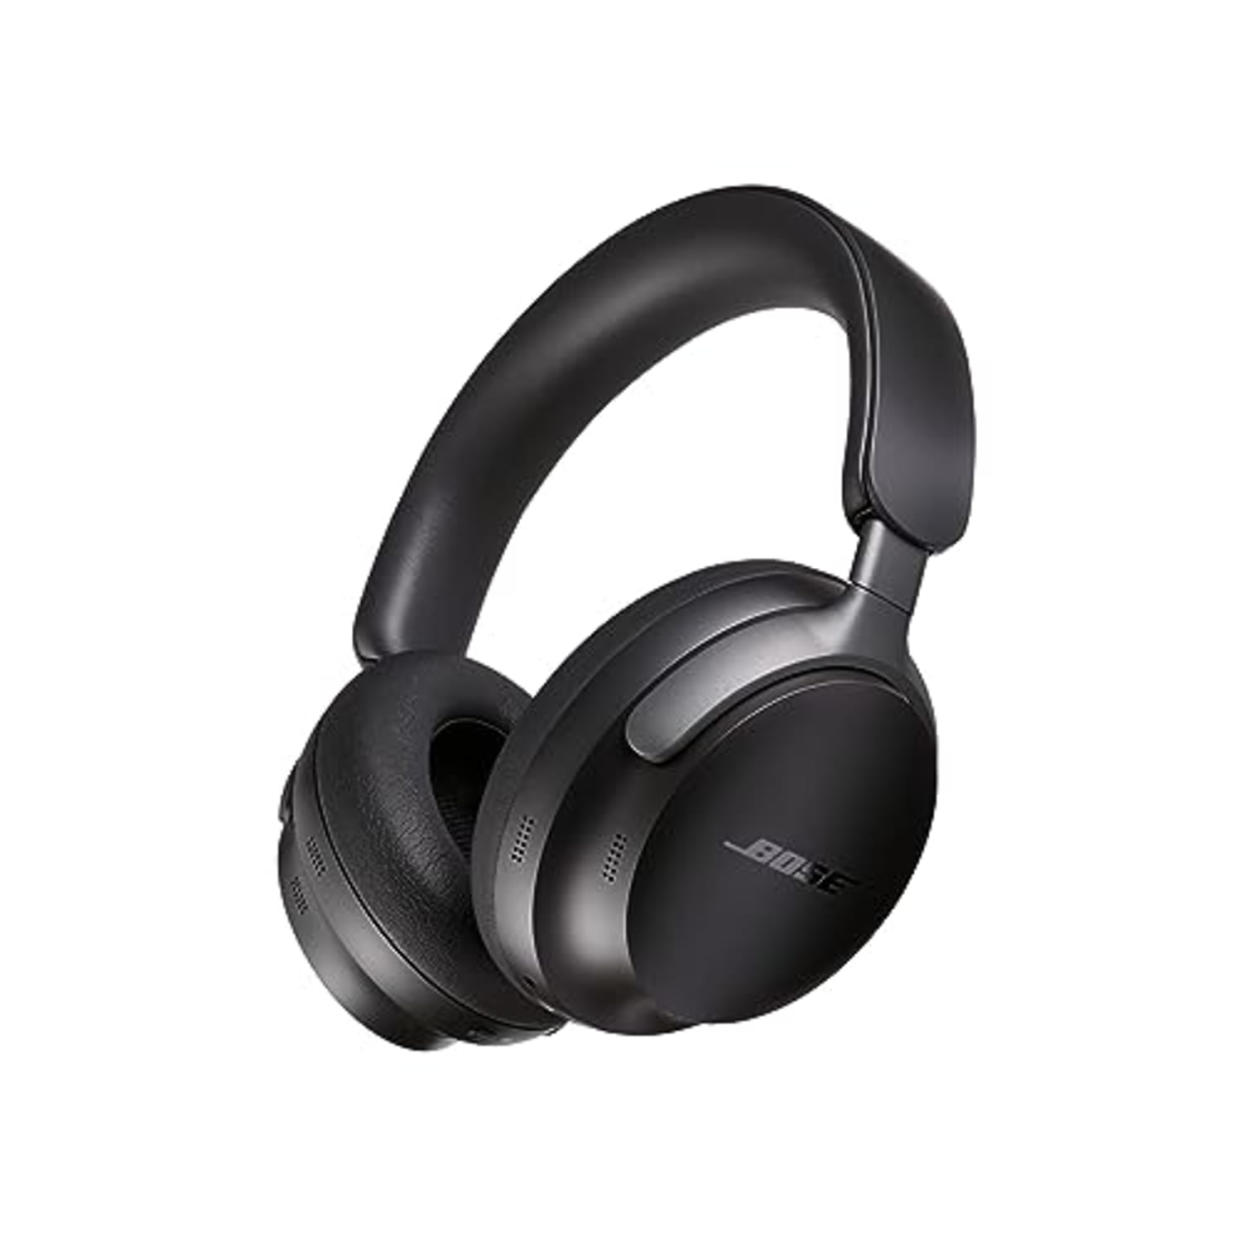 NEW Bose QuietComfort Ultra Wireless Noise Cancelling Headphones with Spatial Audio, Over-the-Ear Headphones with Mic, Up to 24 Hours of Battery Life, Black (AMAZON)